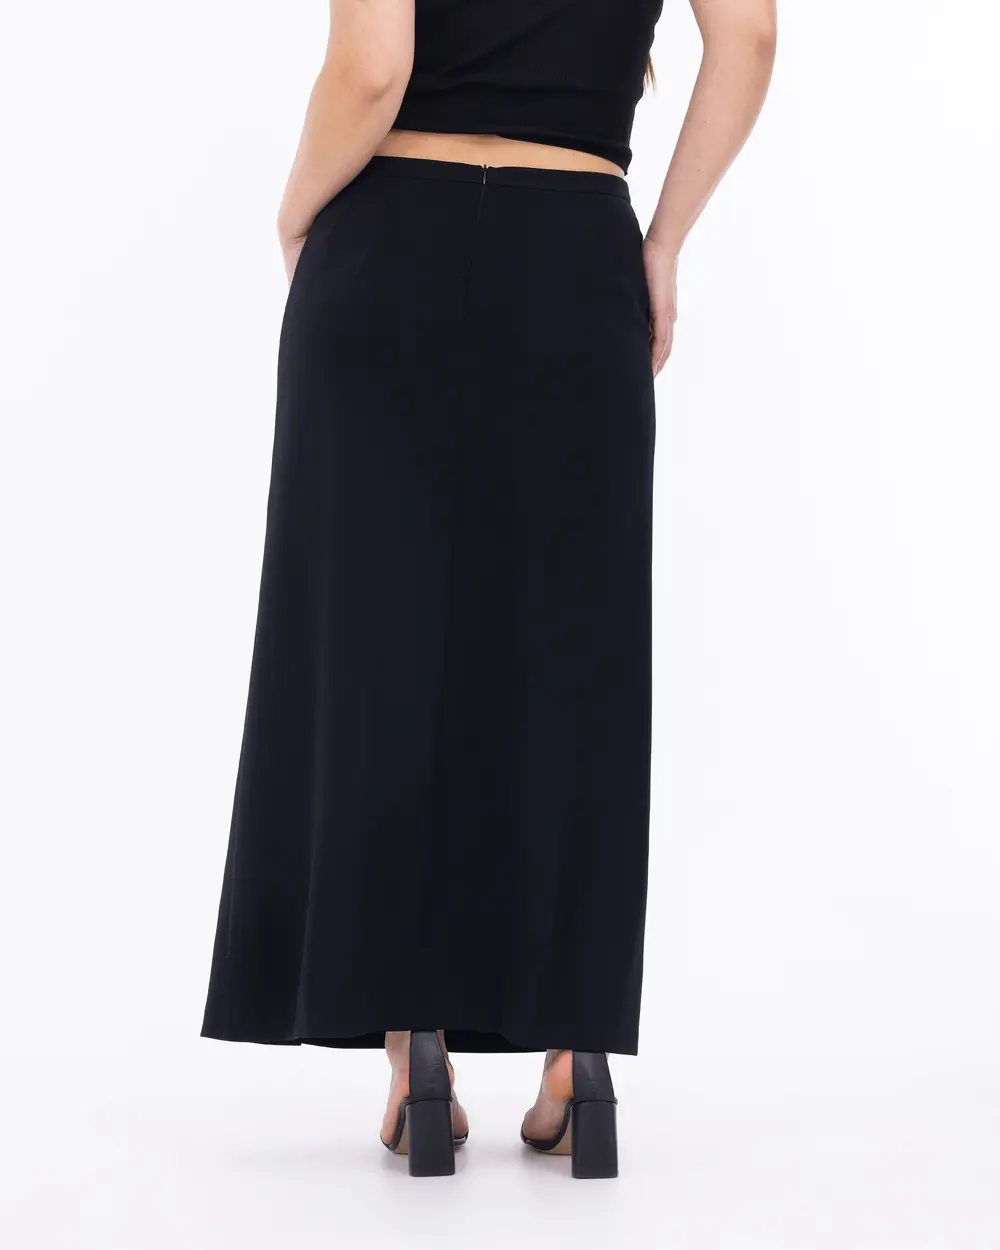 Plus Size Accessory Detail Pleated Stylish Skirt